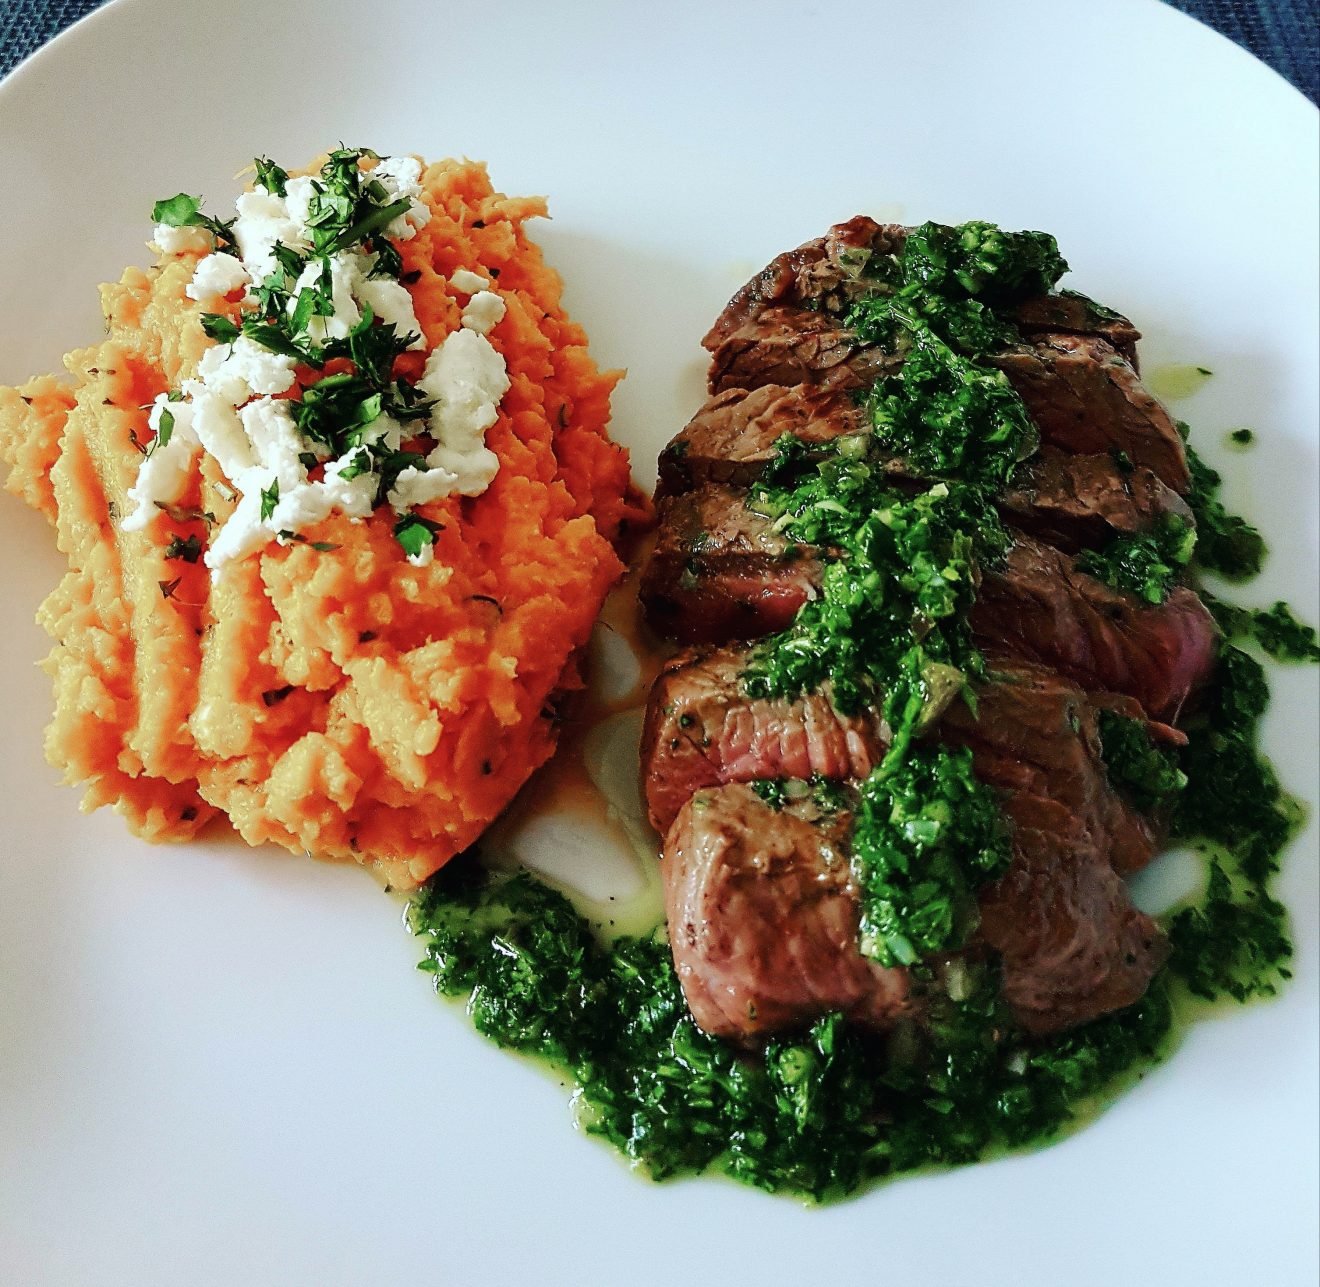 Sirloin Steak and Mashed Sweet Potato, Feta, and Coriander Topped with Homemade Chimichurri